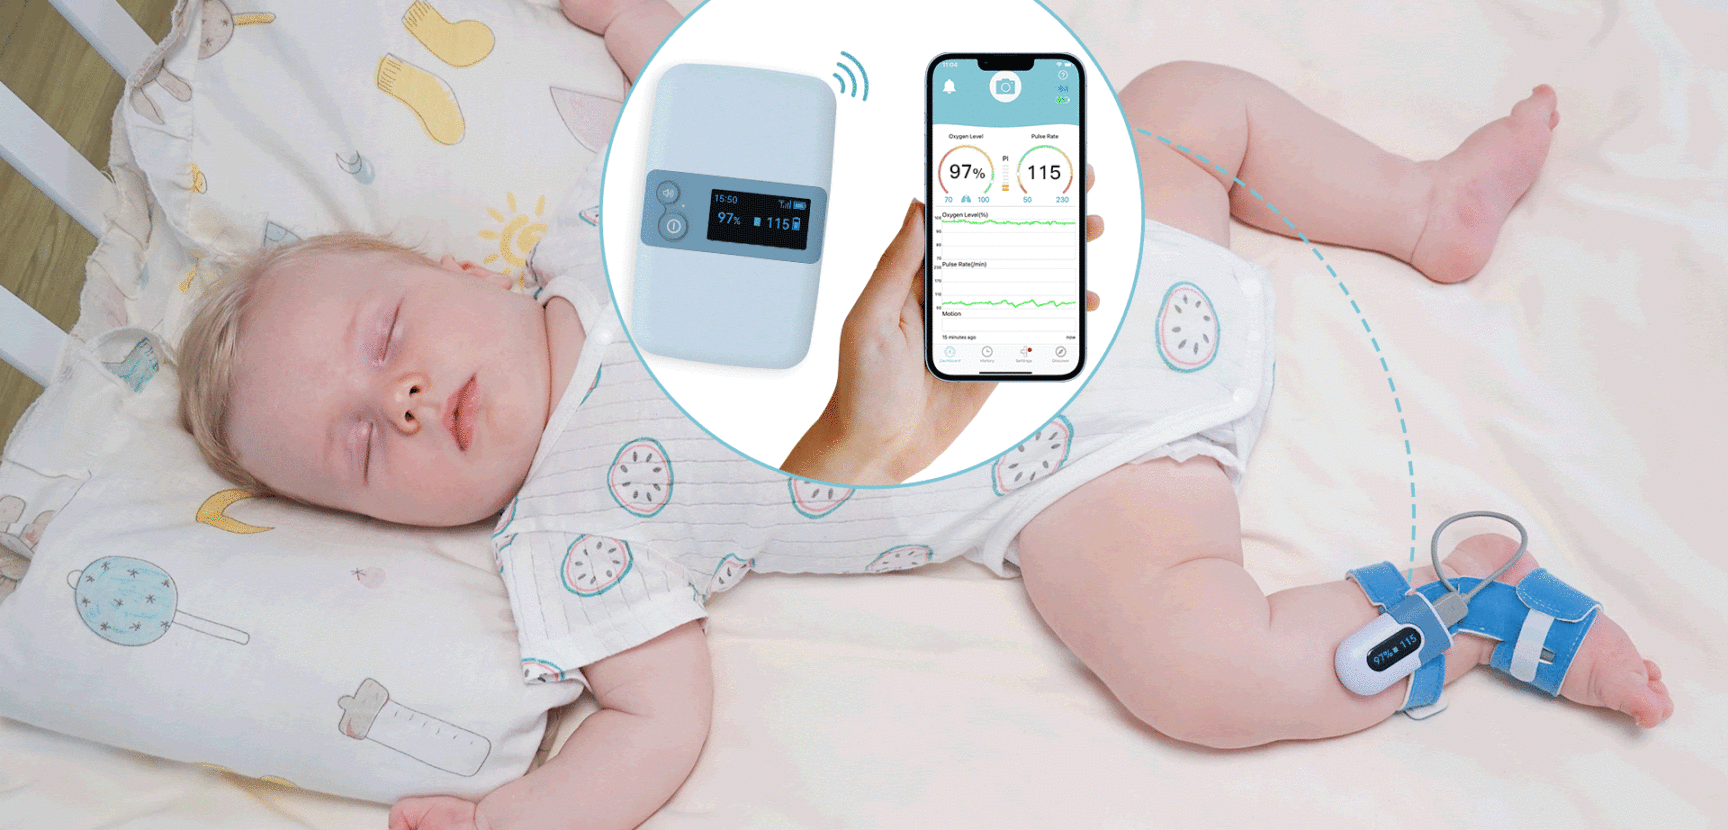 Why Do You Need A Baby Oxygen Monitor?